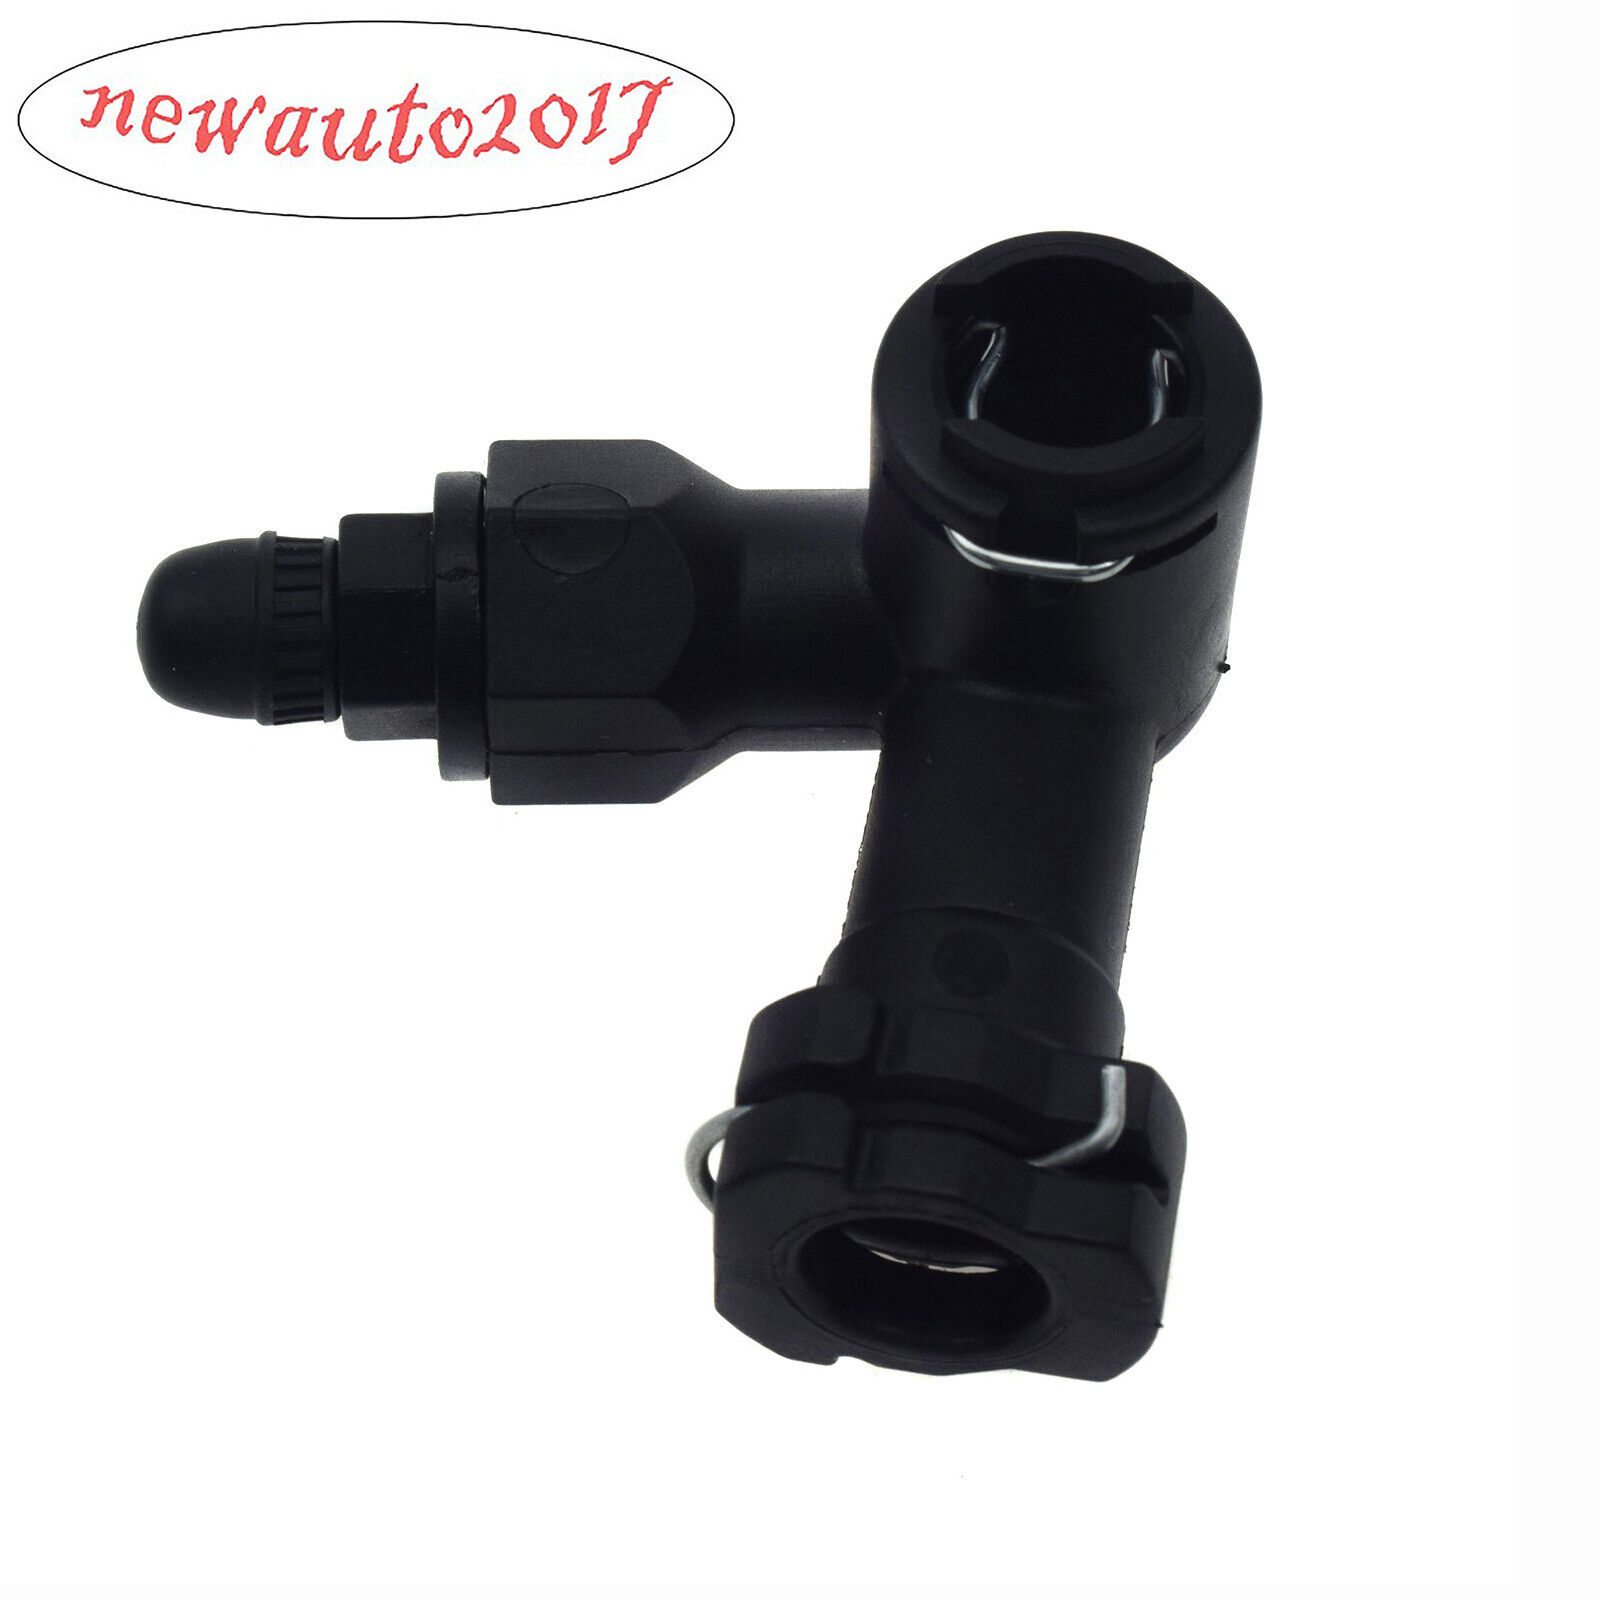 Gearbox Clutch Control Pipe For Vauxhall F13 F17 F23 F35 Corsa Astra  13105589 eBay